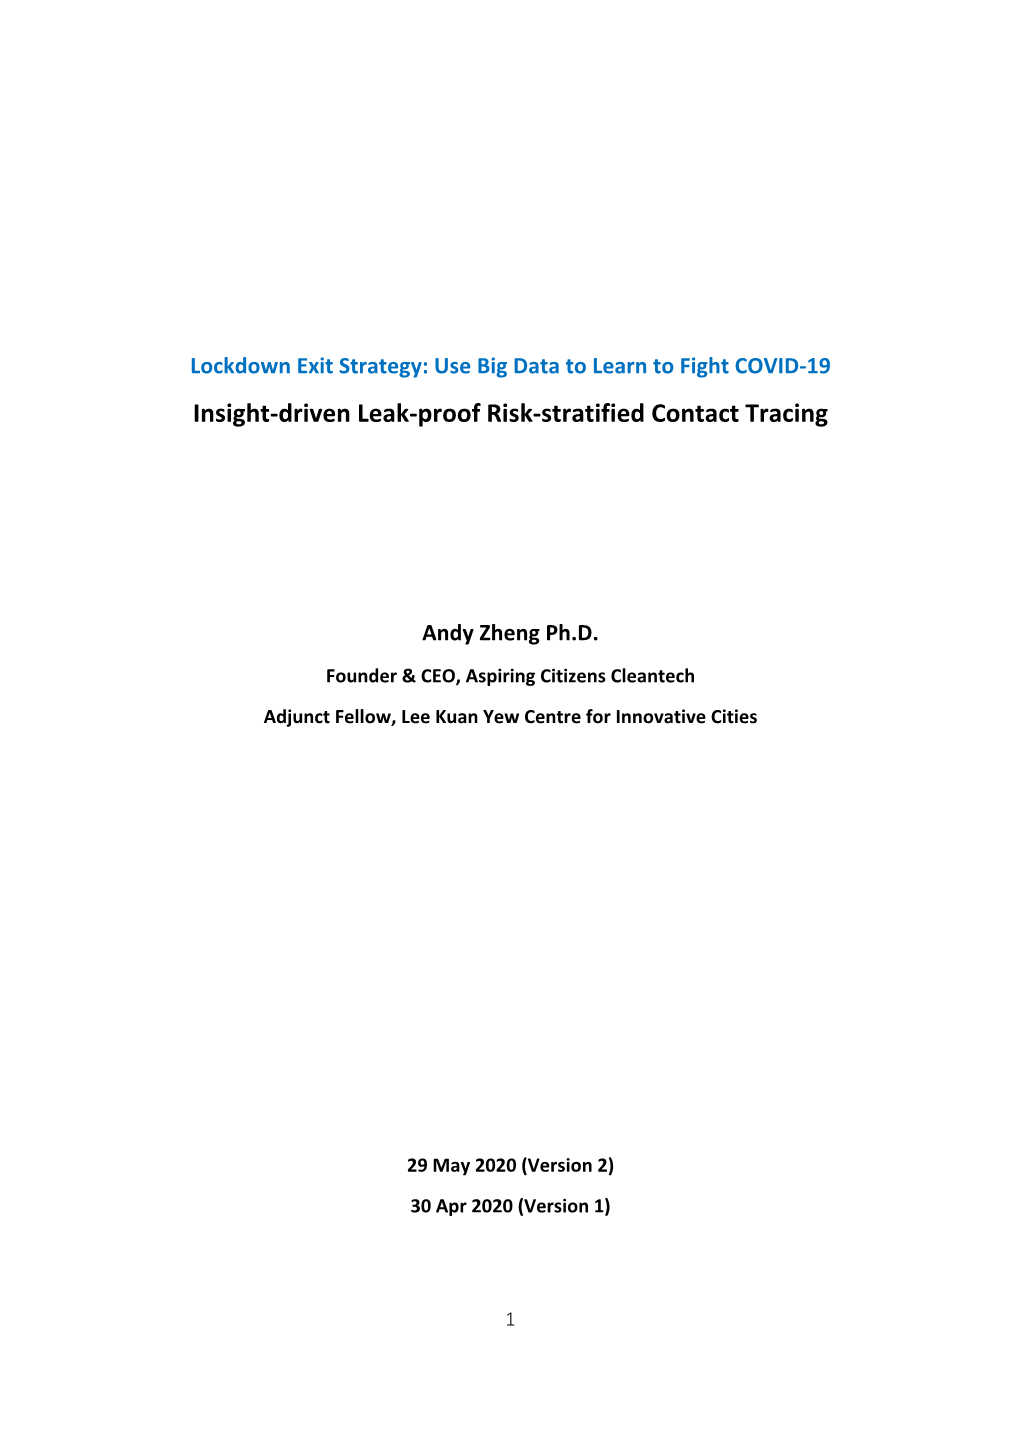 Insight-Driven Leak-Proof Risk-Stratified Contact Tracing